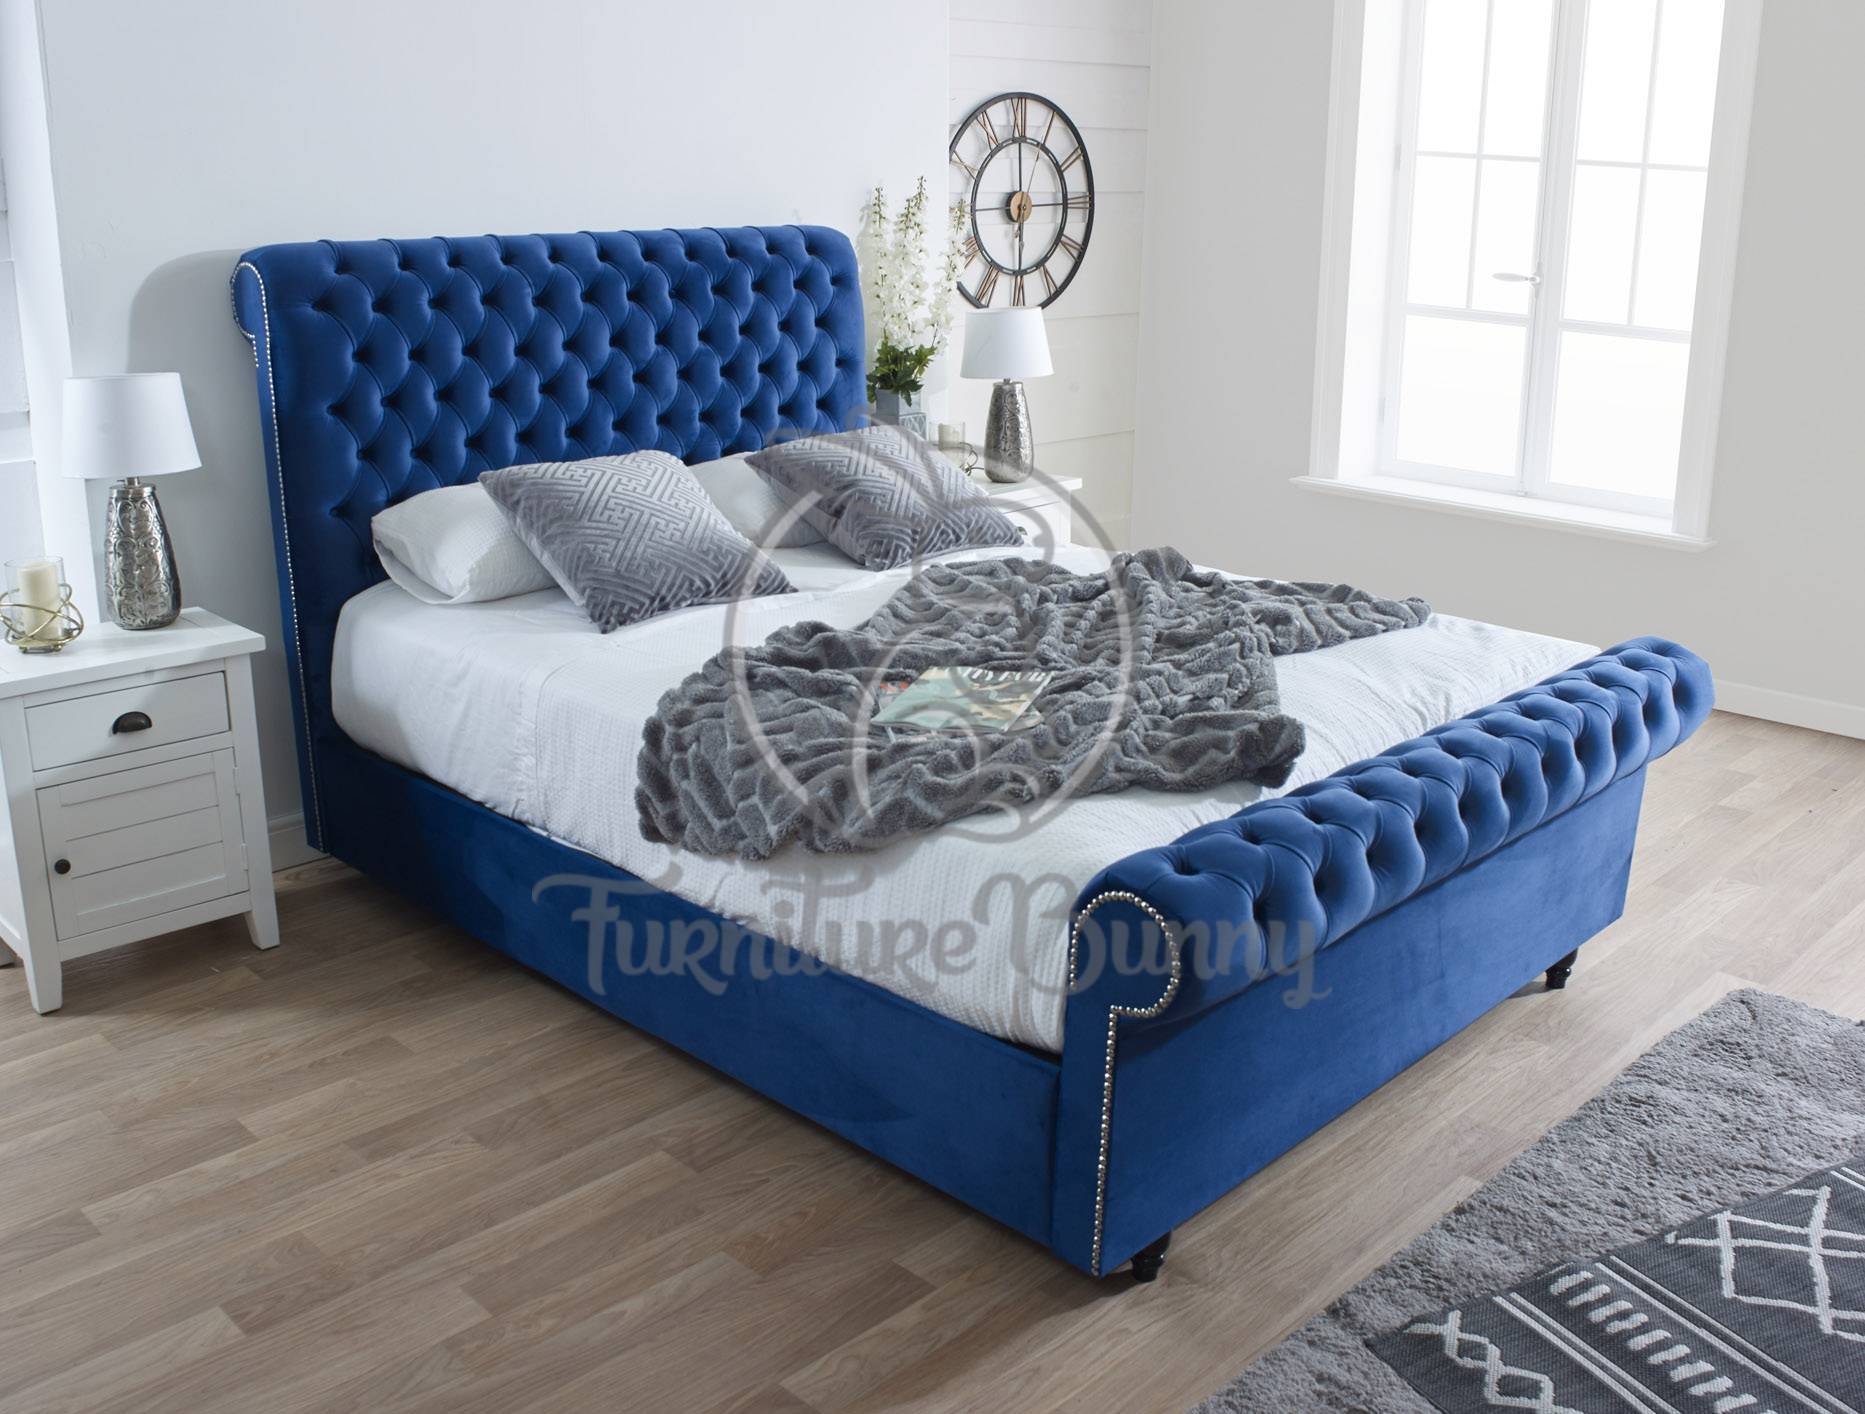 Spanish Sleigh Bed – Furniture Bunny